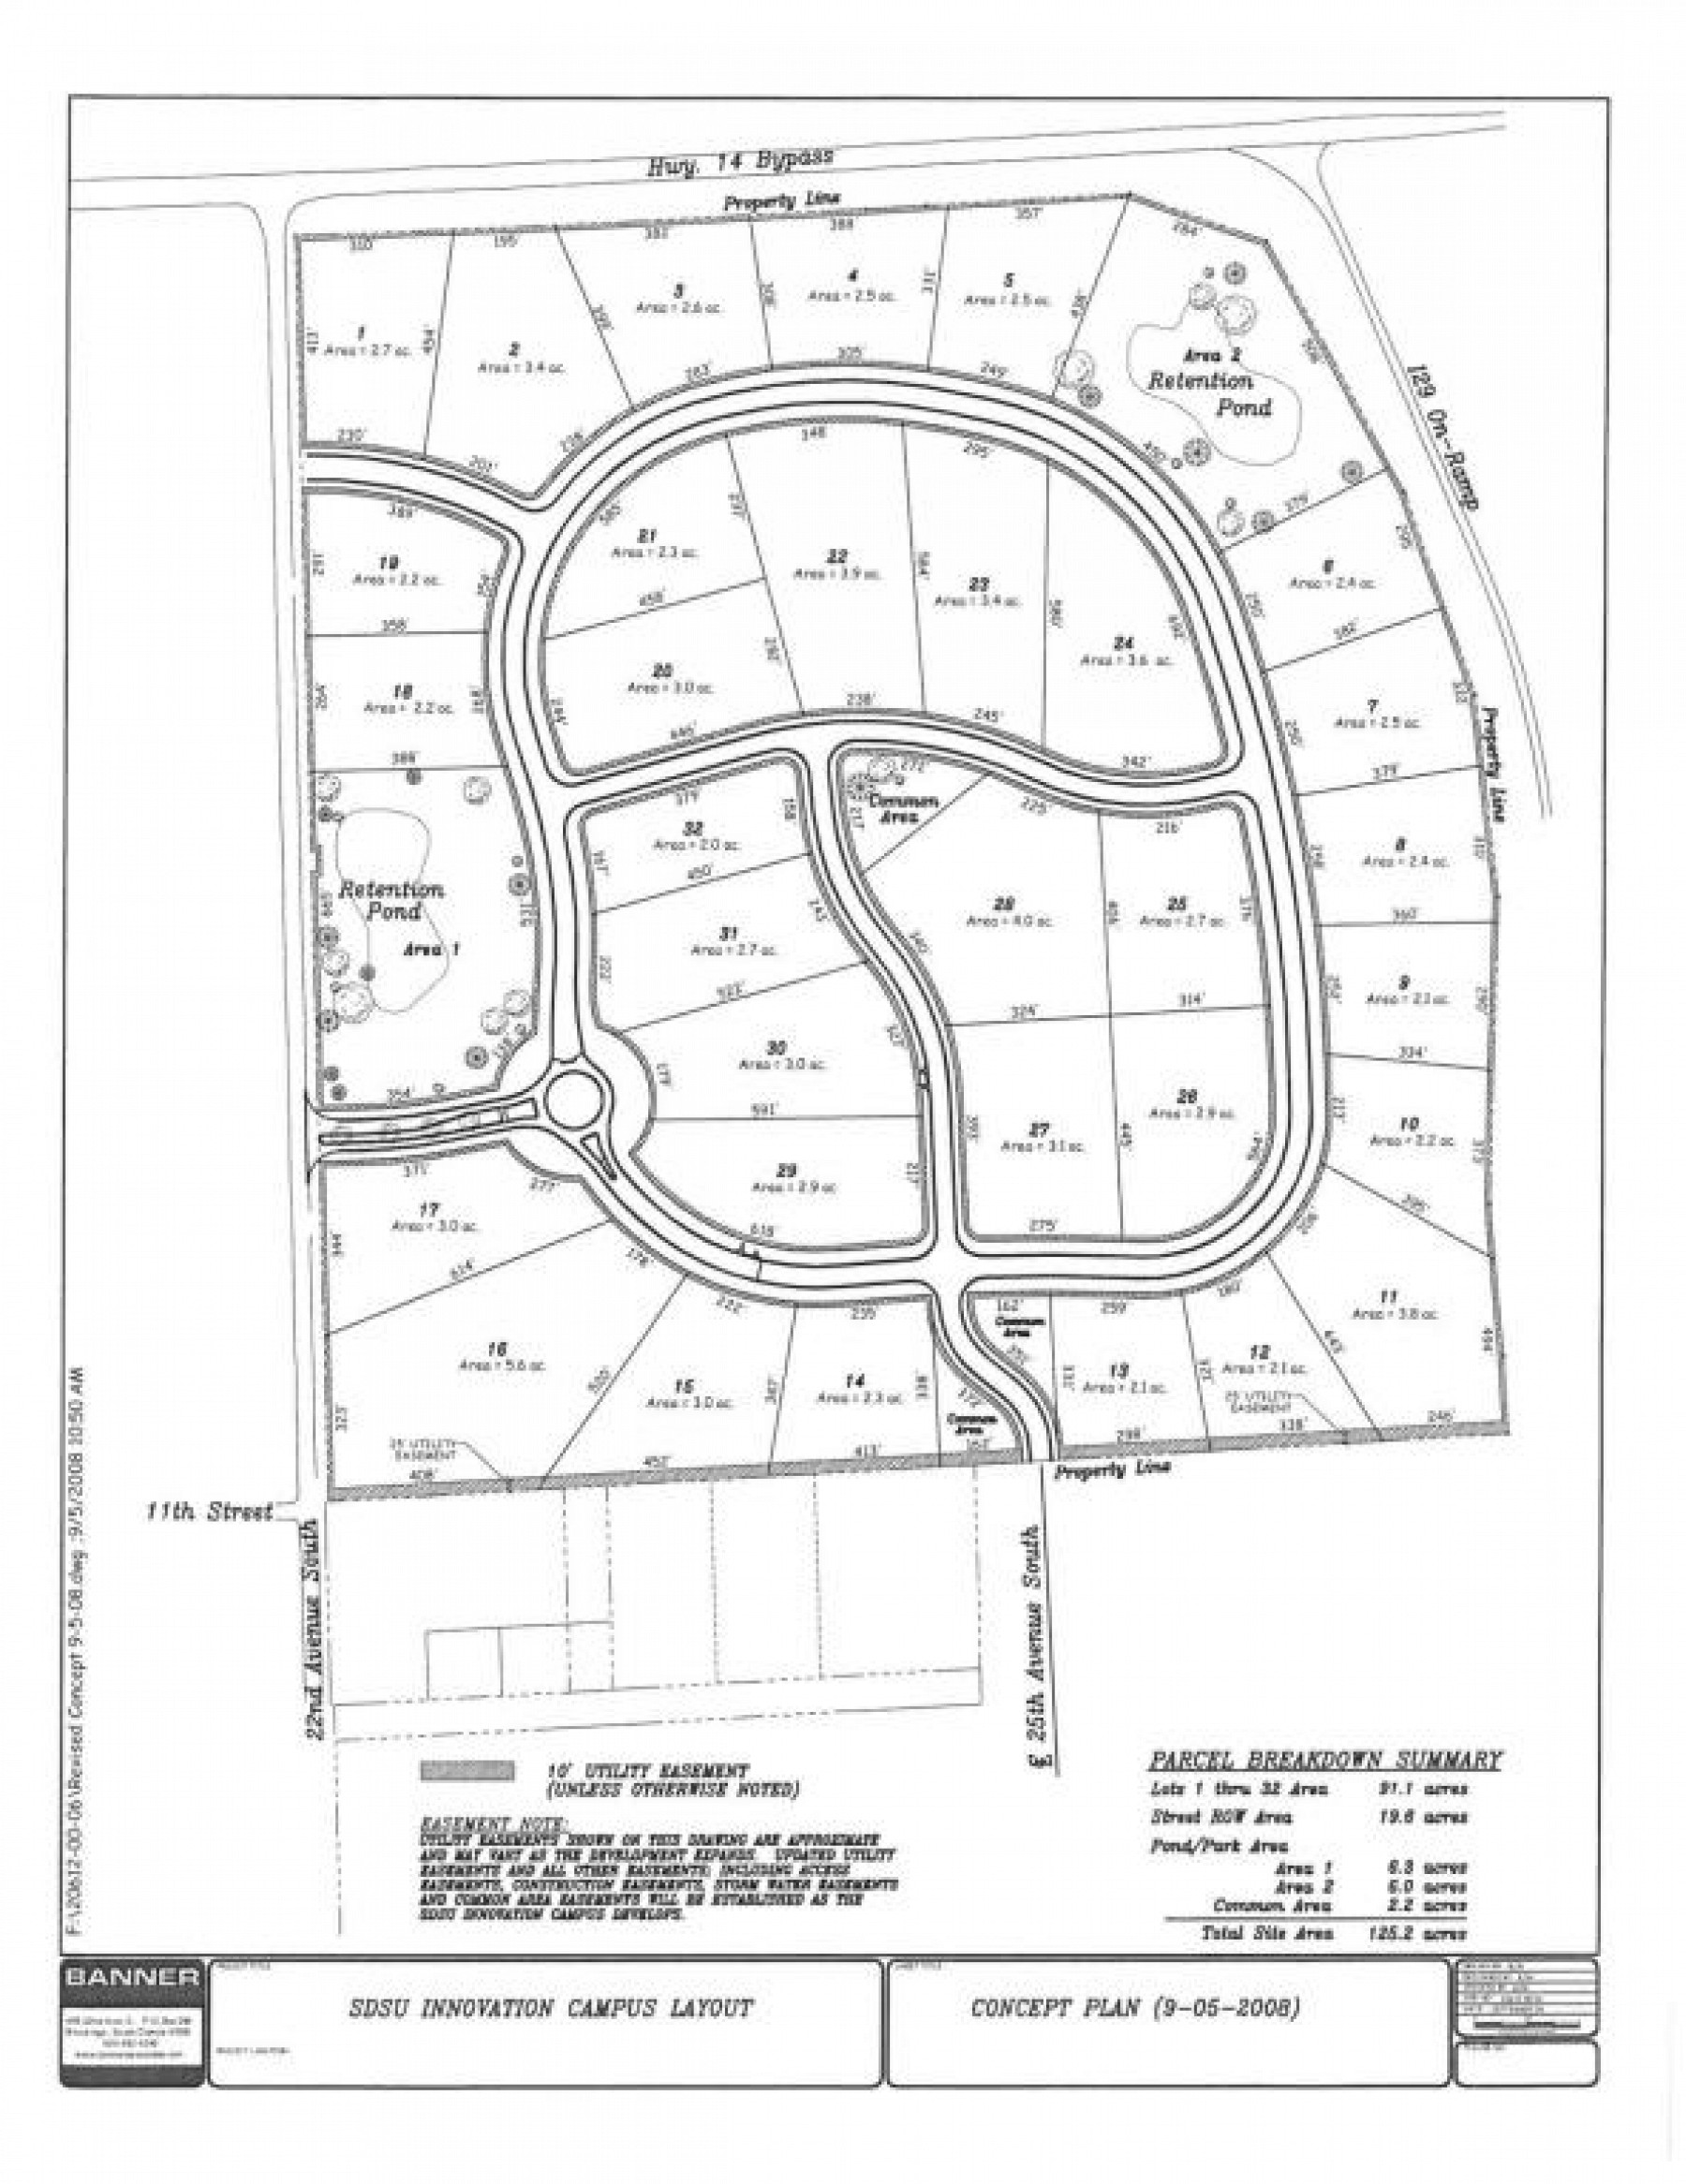 Lot 10 Innovation Campus, Brookings, SD 57006